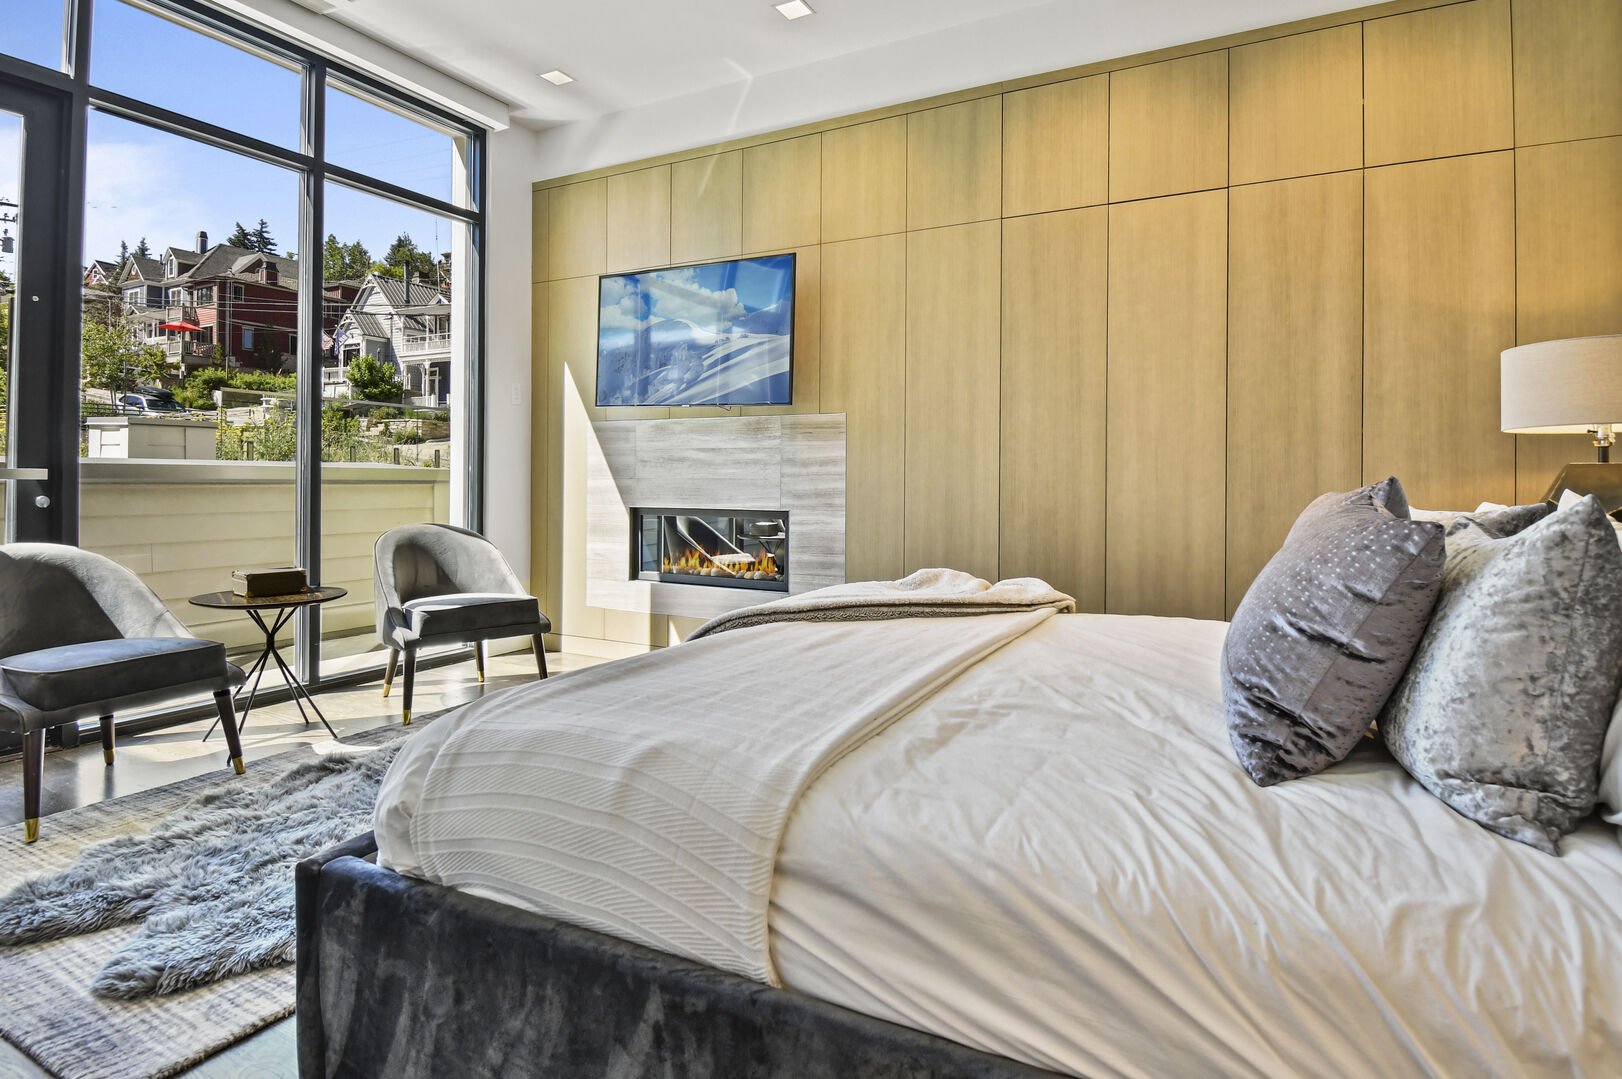 Master suite enjoys plenty of natural light from floor-to-ceiling windows.